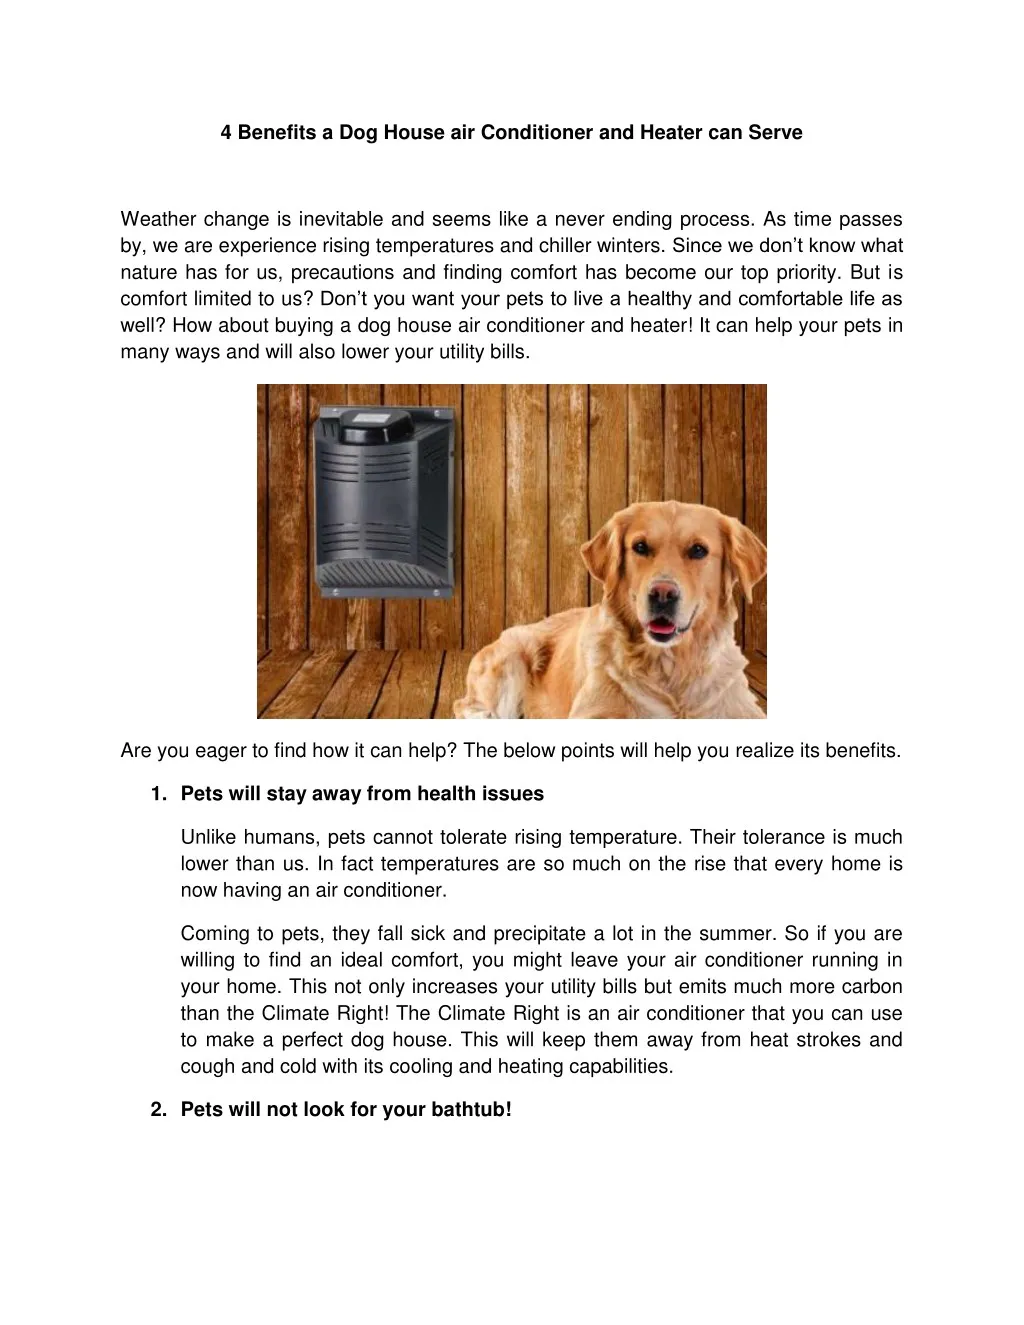 4 benefits a dog house air conditioner and heater